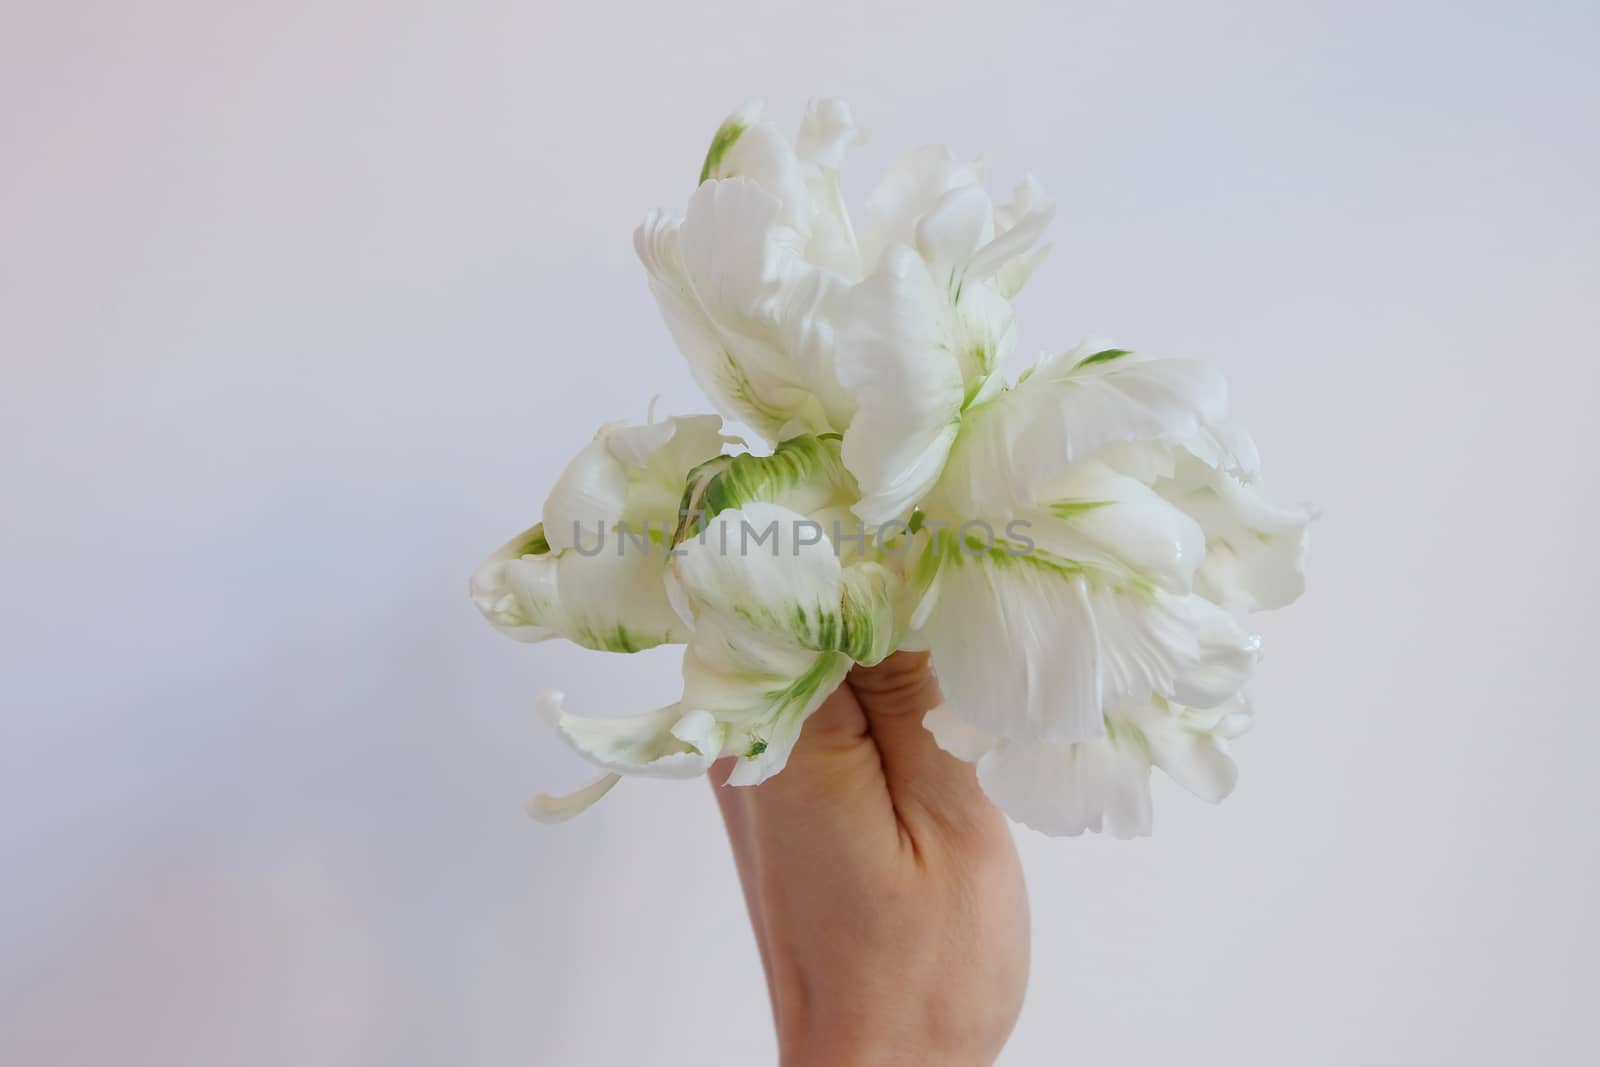 Holding white and green parrot tulips